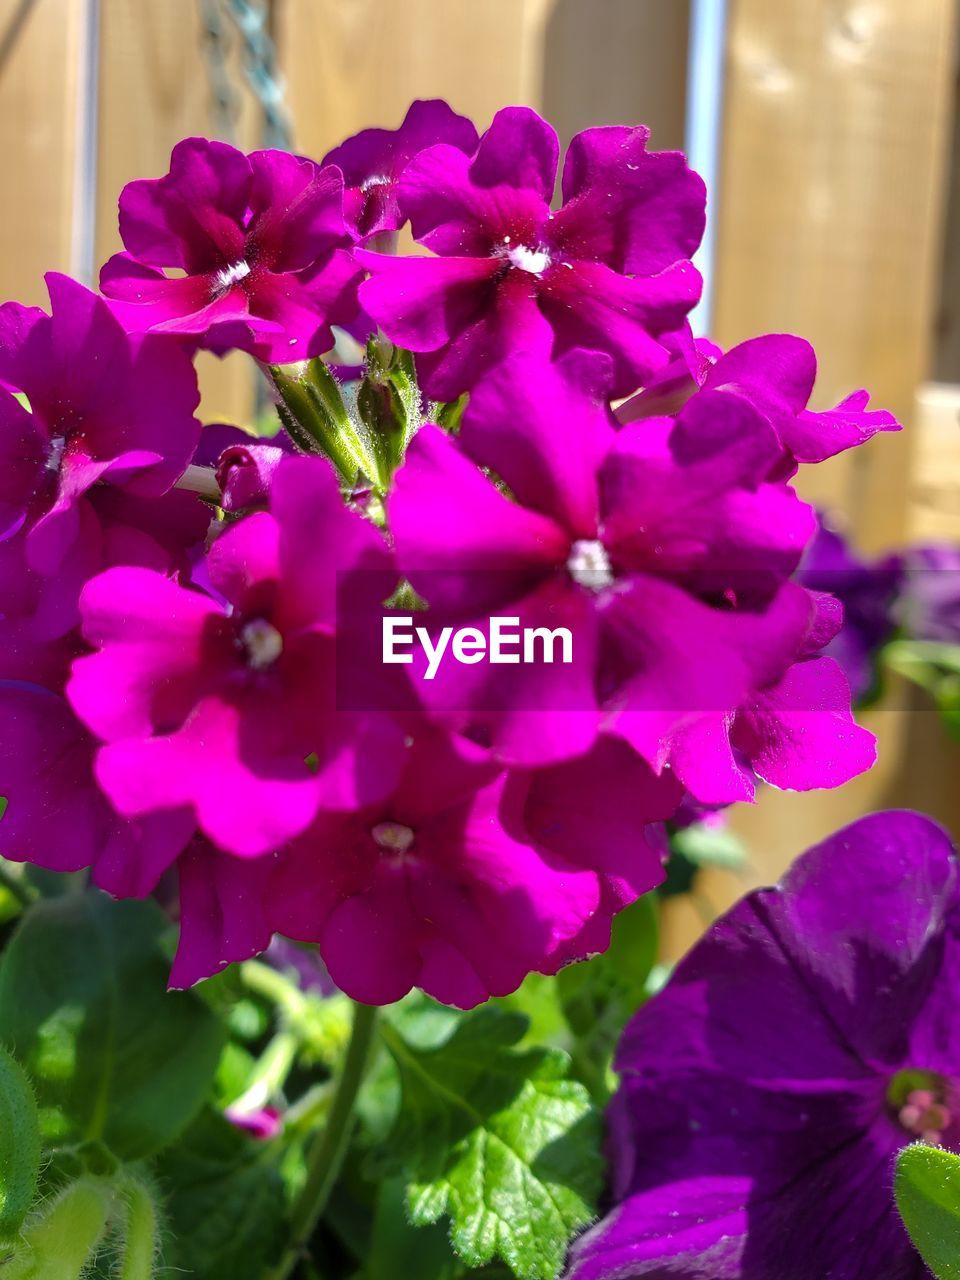 flower, flowering plant, plant, freshness, beauty in nature, close-up, petal, fragility, nature, pink, purple, growth, flower head, inflorescence, focus on foreground, no people, magenta, outdoors, vibrant color, plant part, day, leaf, orchid, selective focus, blossom, springtime